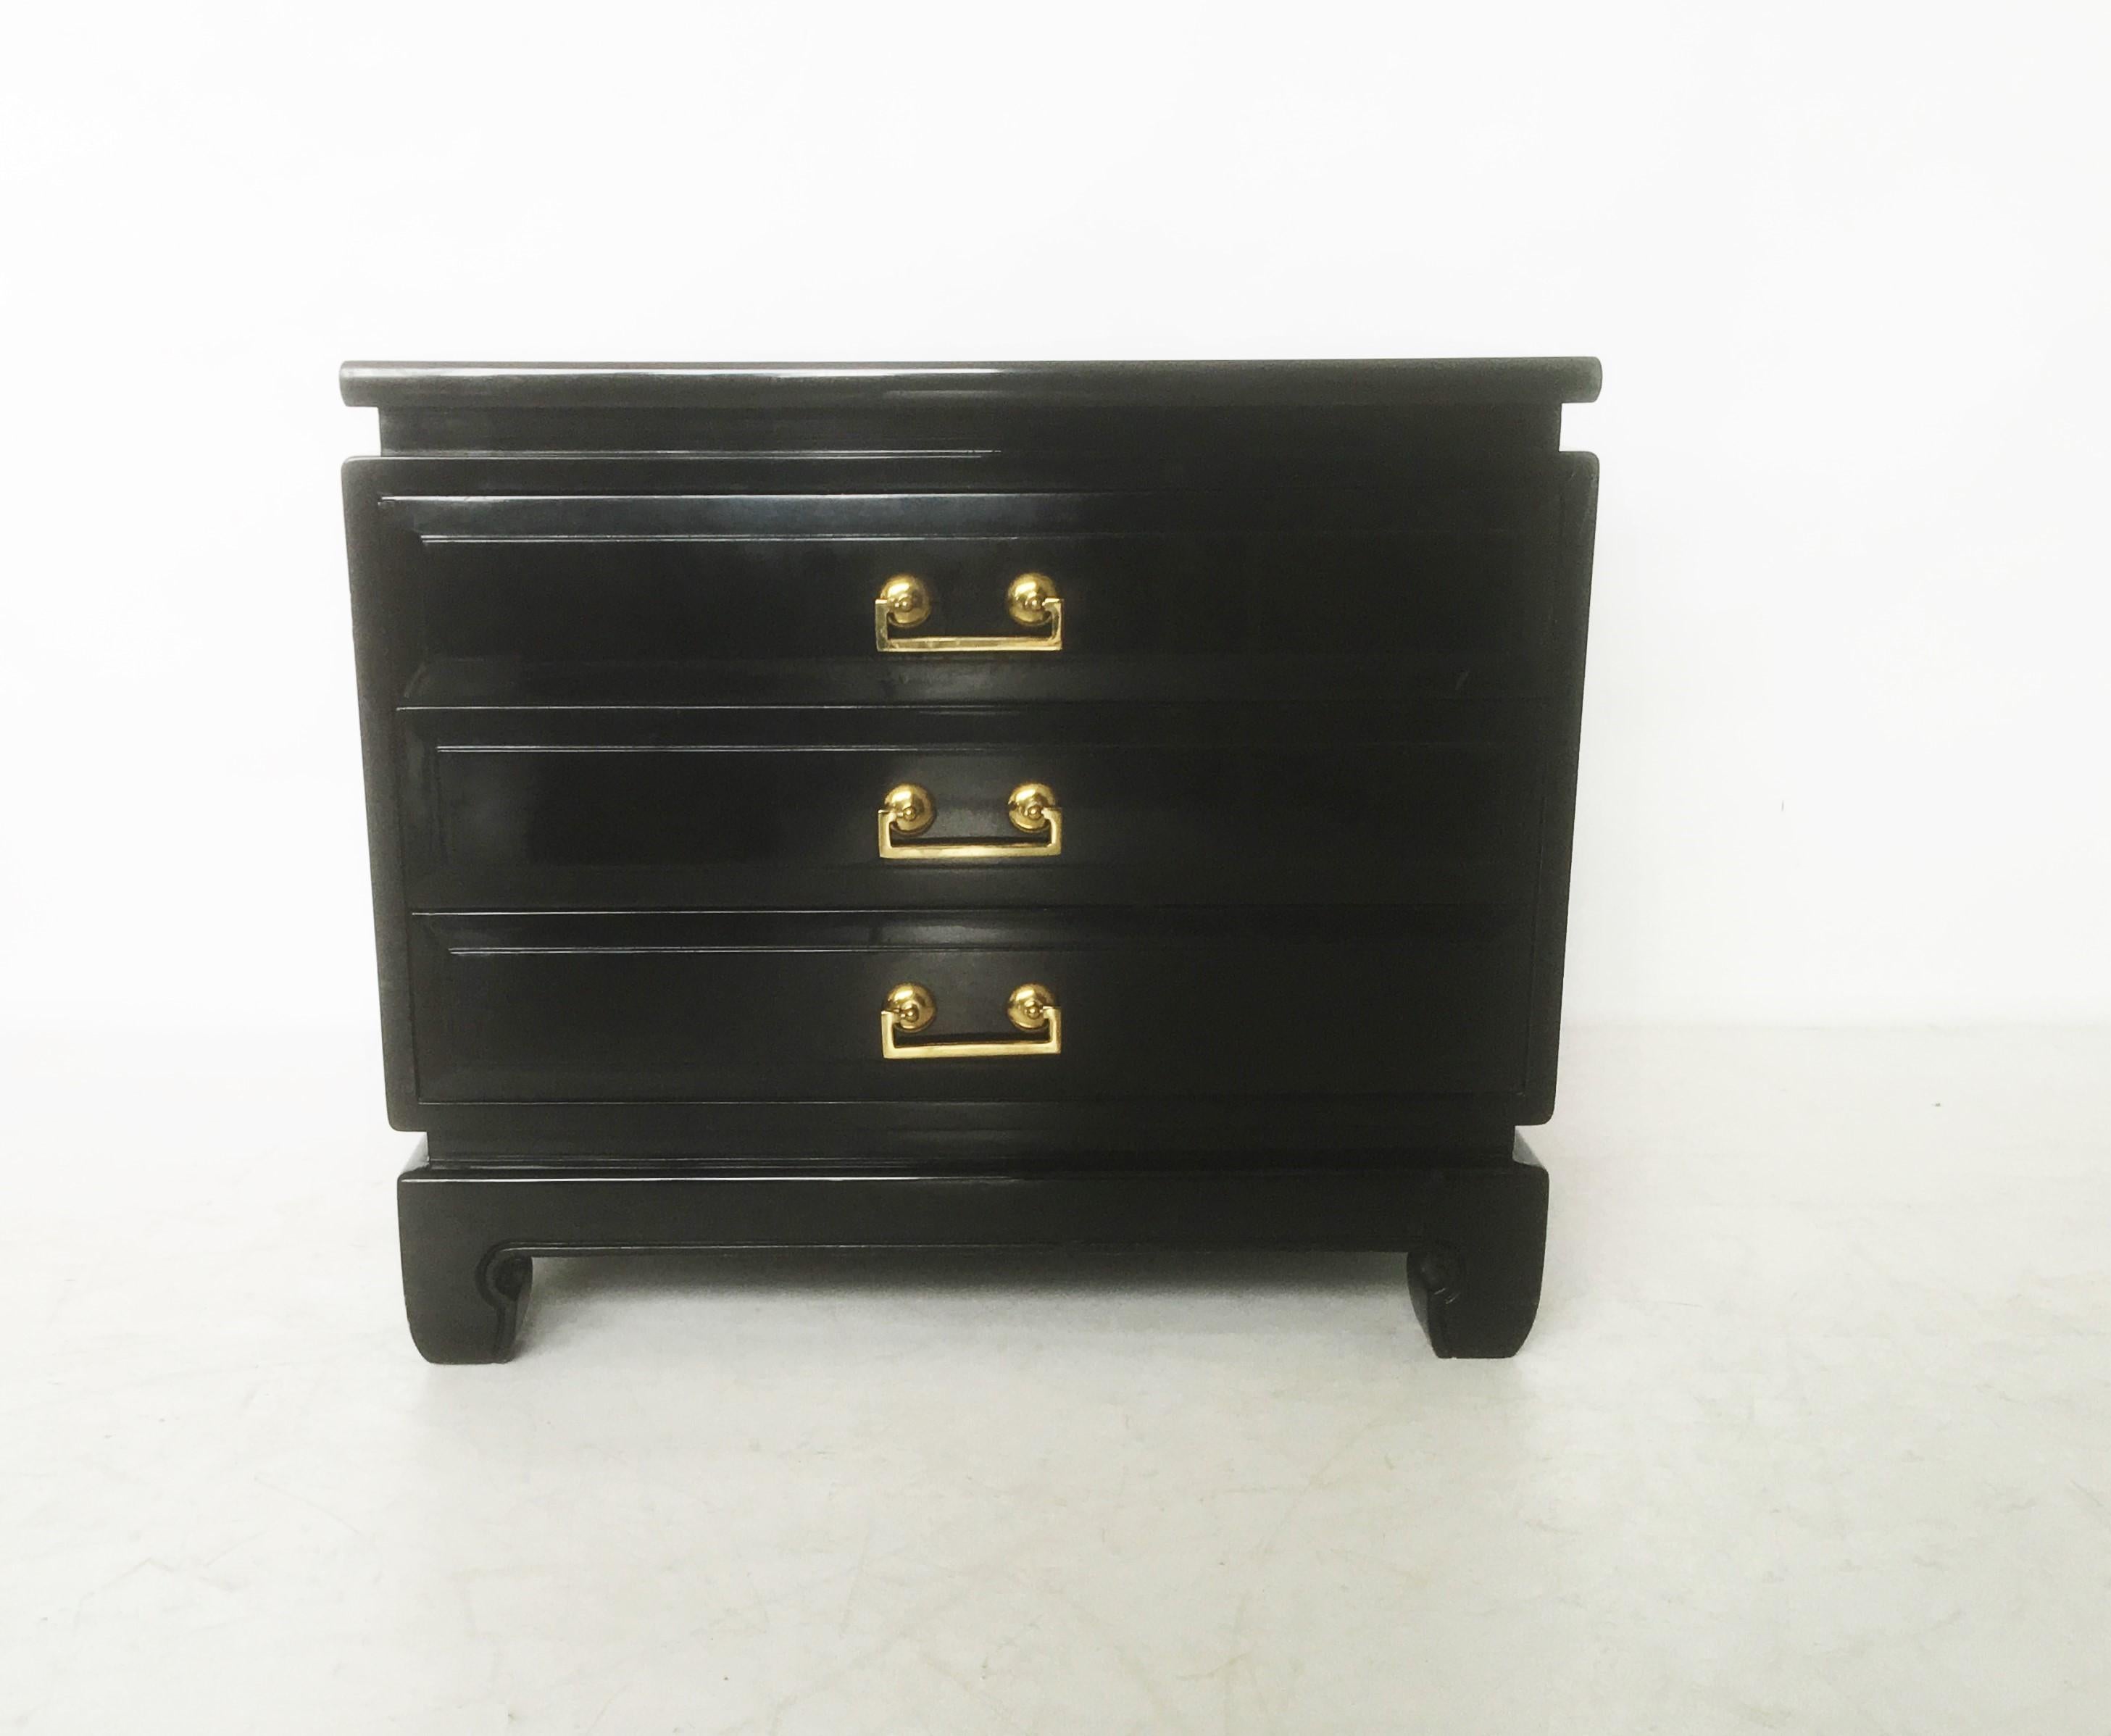 Freshly lacquered pair of vintage Hollywood Regency midcentury nightstands, circa 1950s-1960s. Superior craftsmanship tables made of solid wood. The tables feature three drawers, original brass hardware handles and beautiful Ming style legs. The